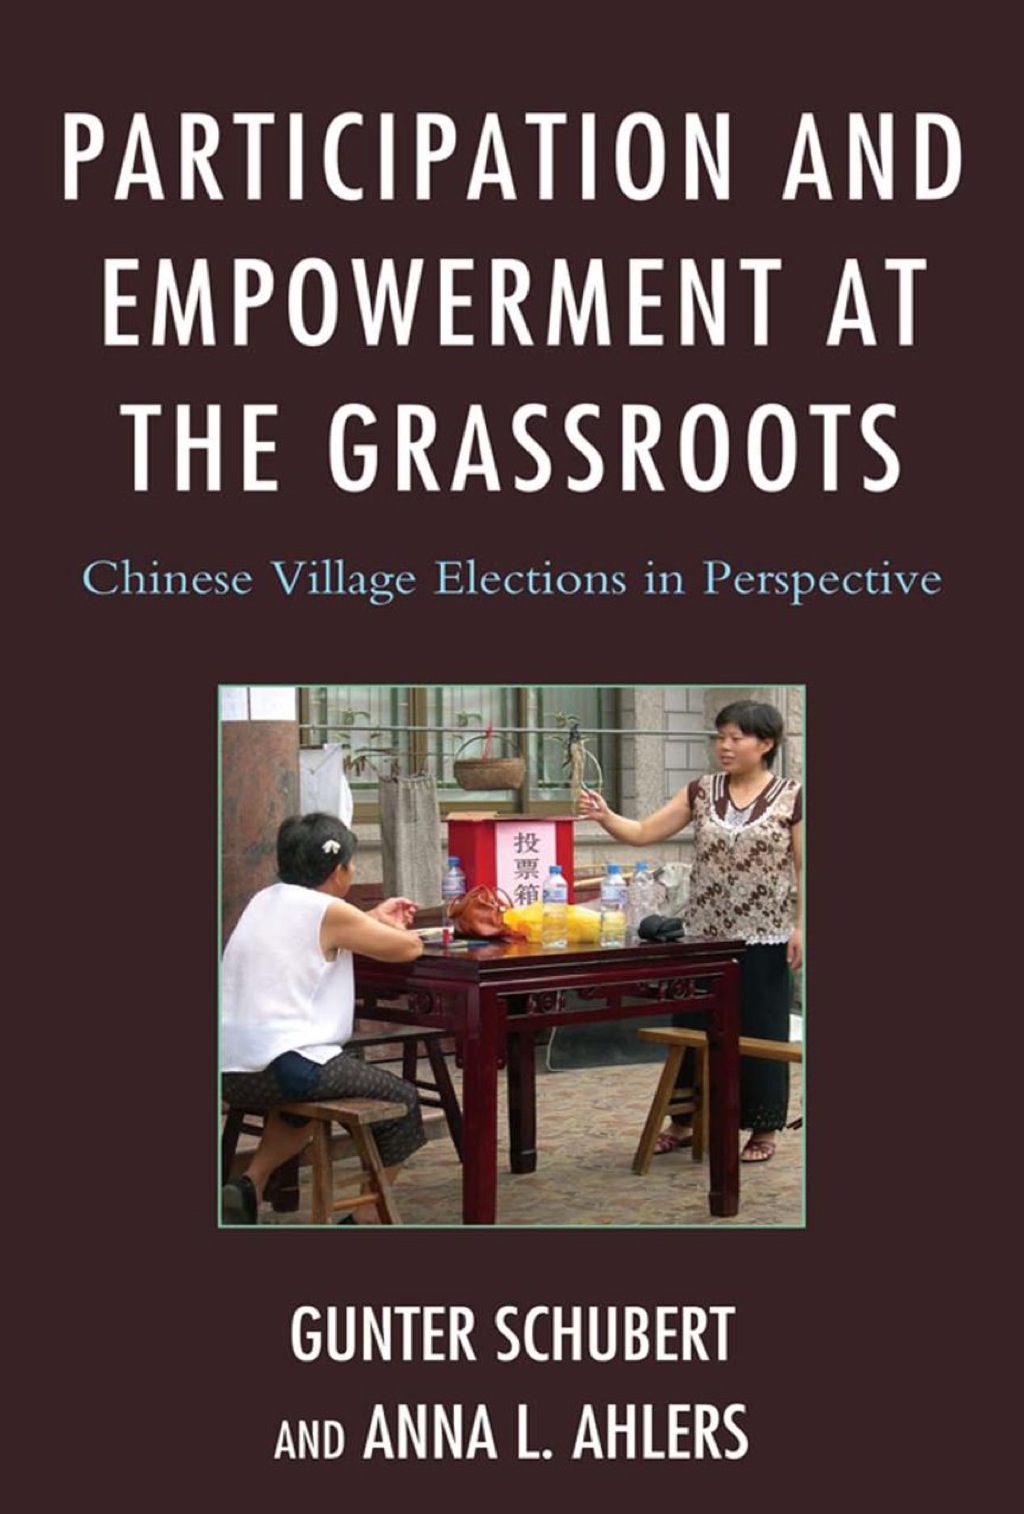 Participation and Empowerment at the Grassroots (eBook) - Gunter Schubert; Anna L. Ahlers,